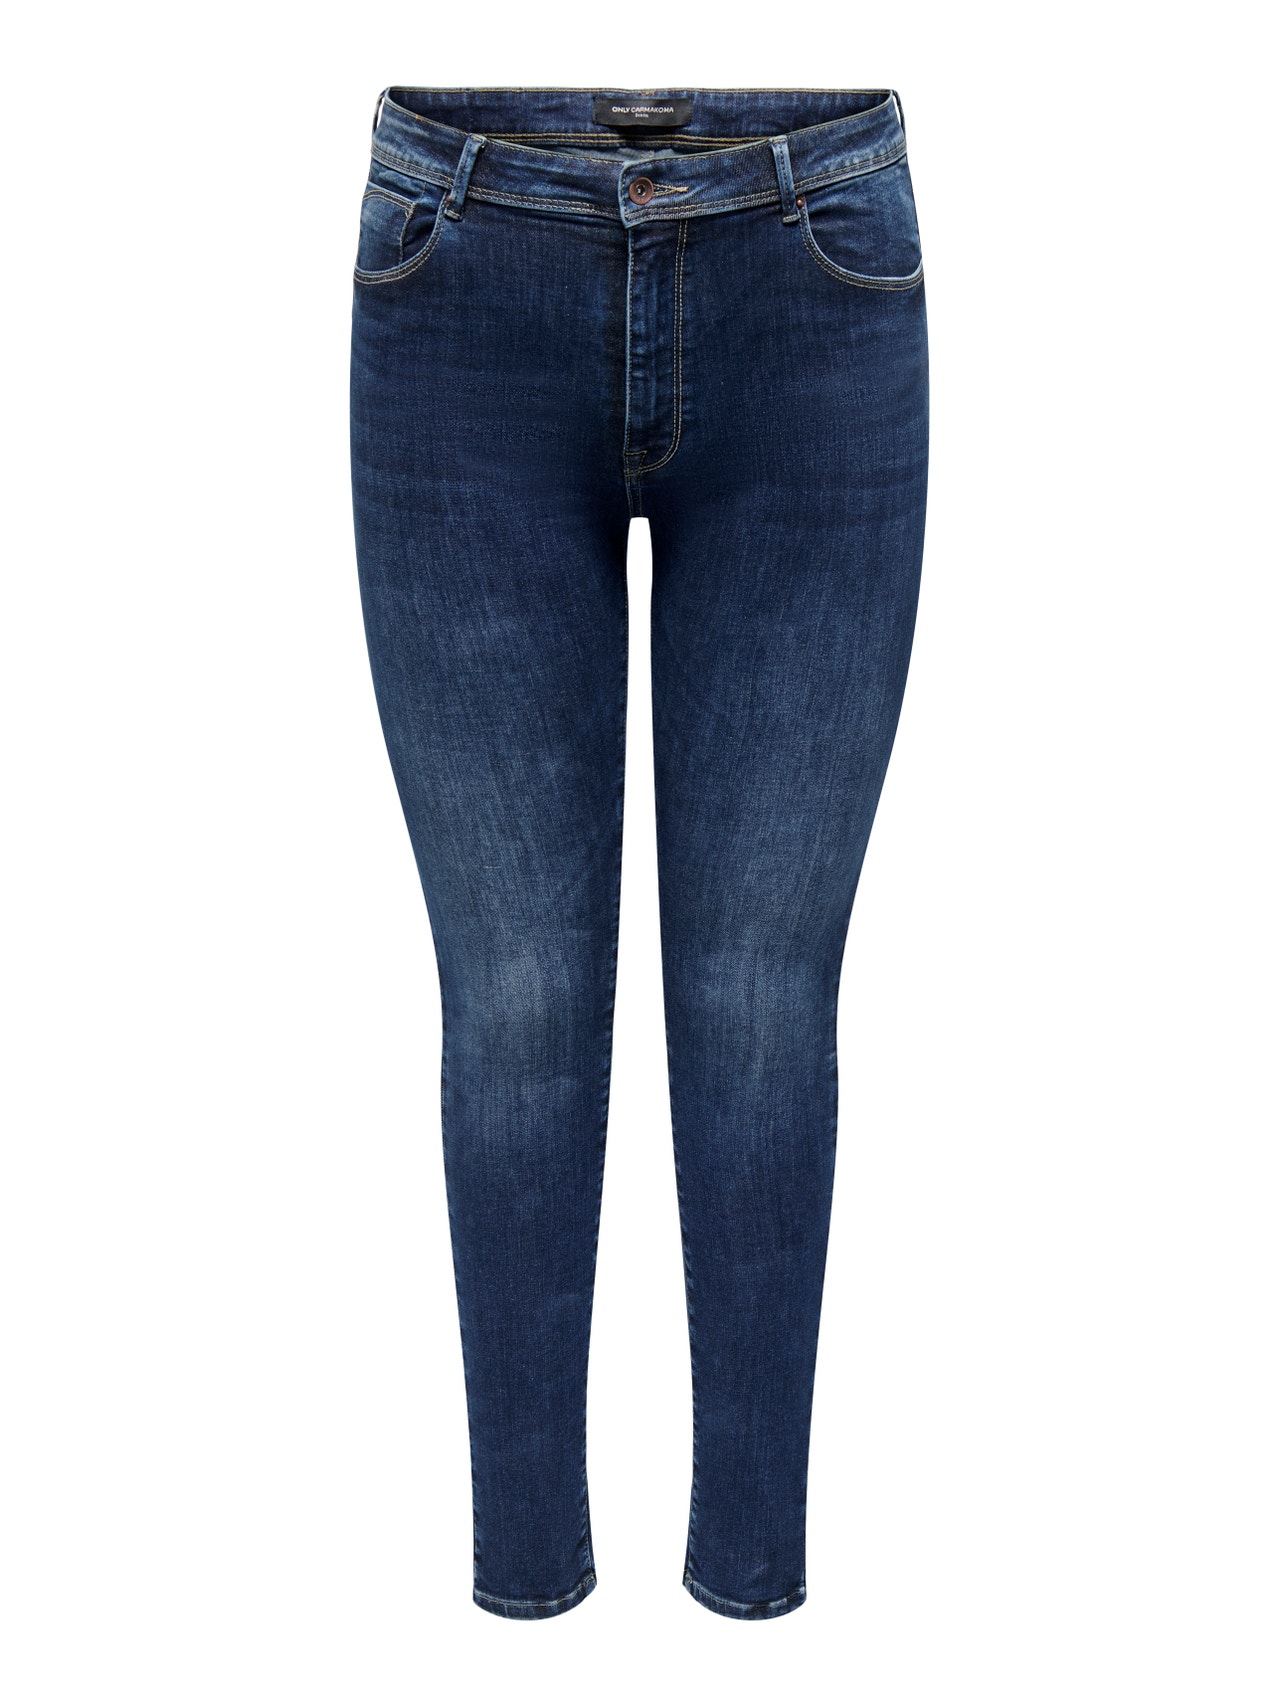 ONLY Jeans Skinny Fit Taille classique -Dark Blue Denim - 15280974